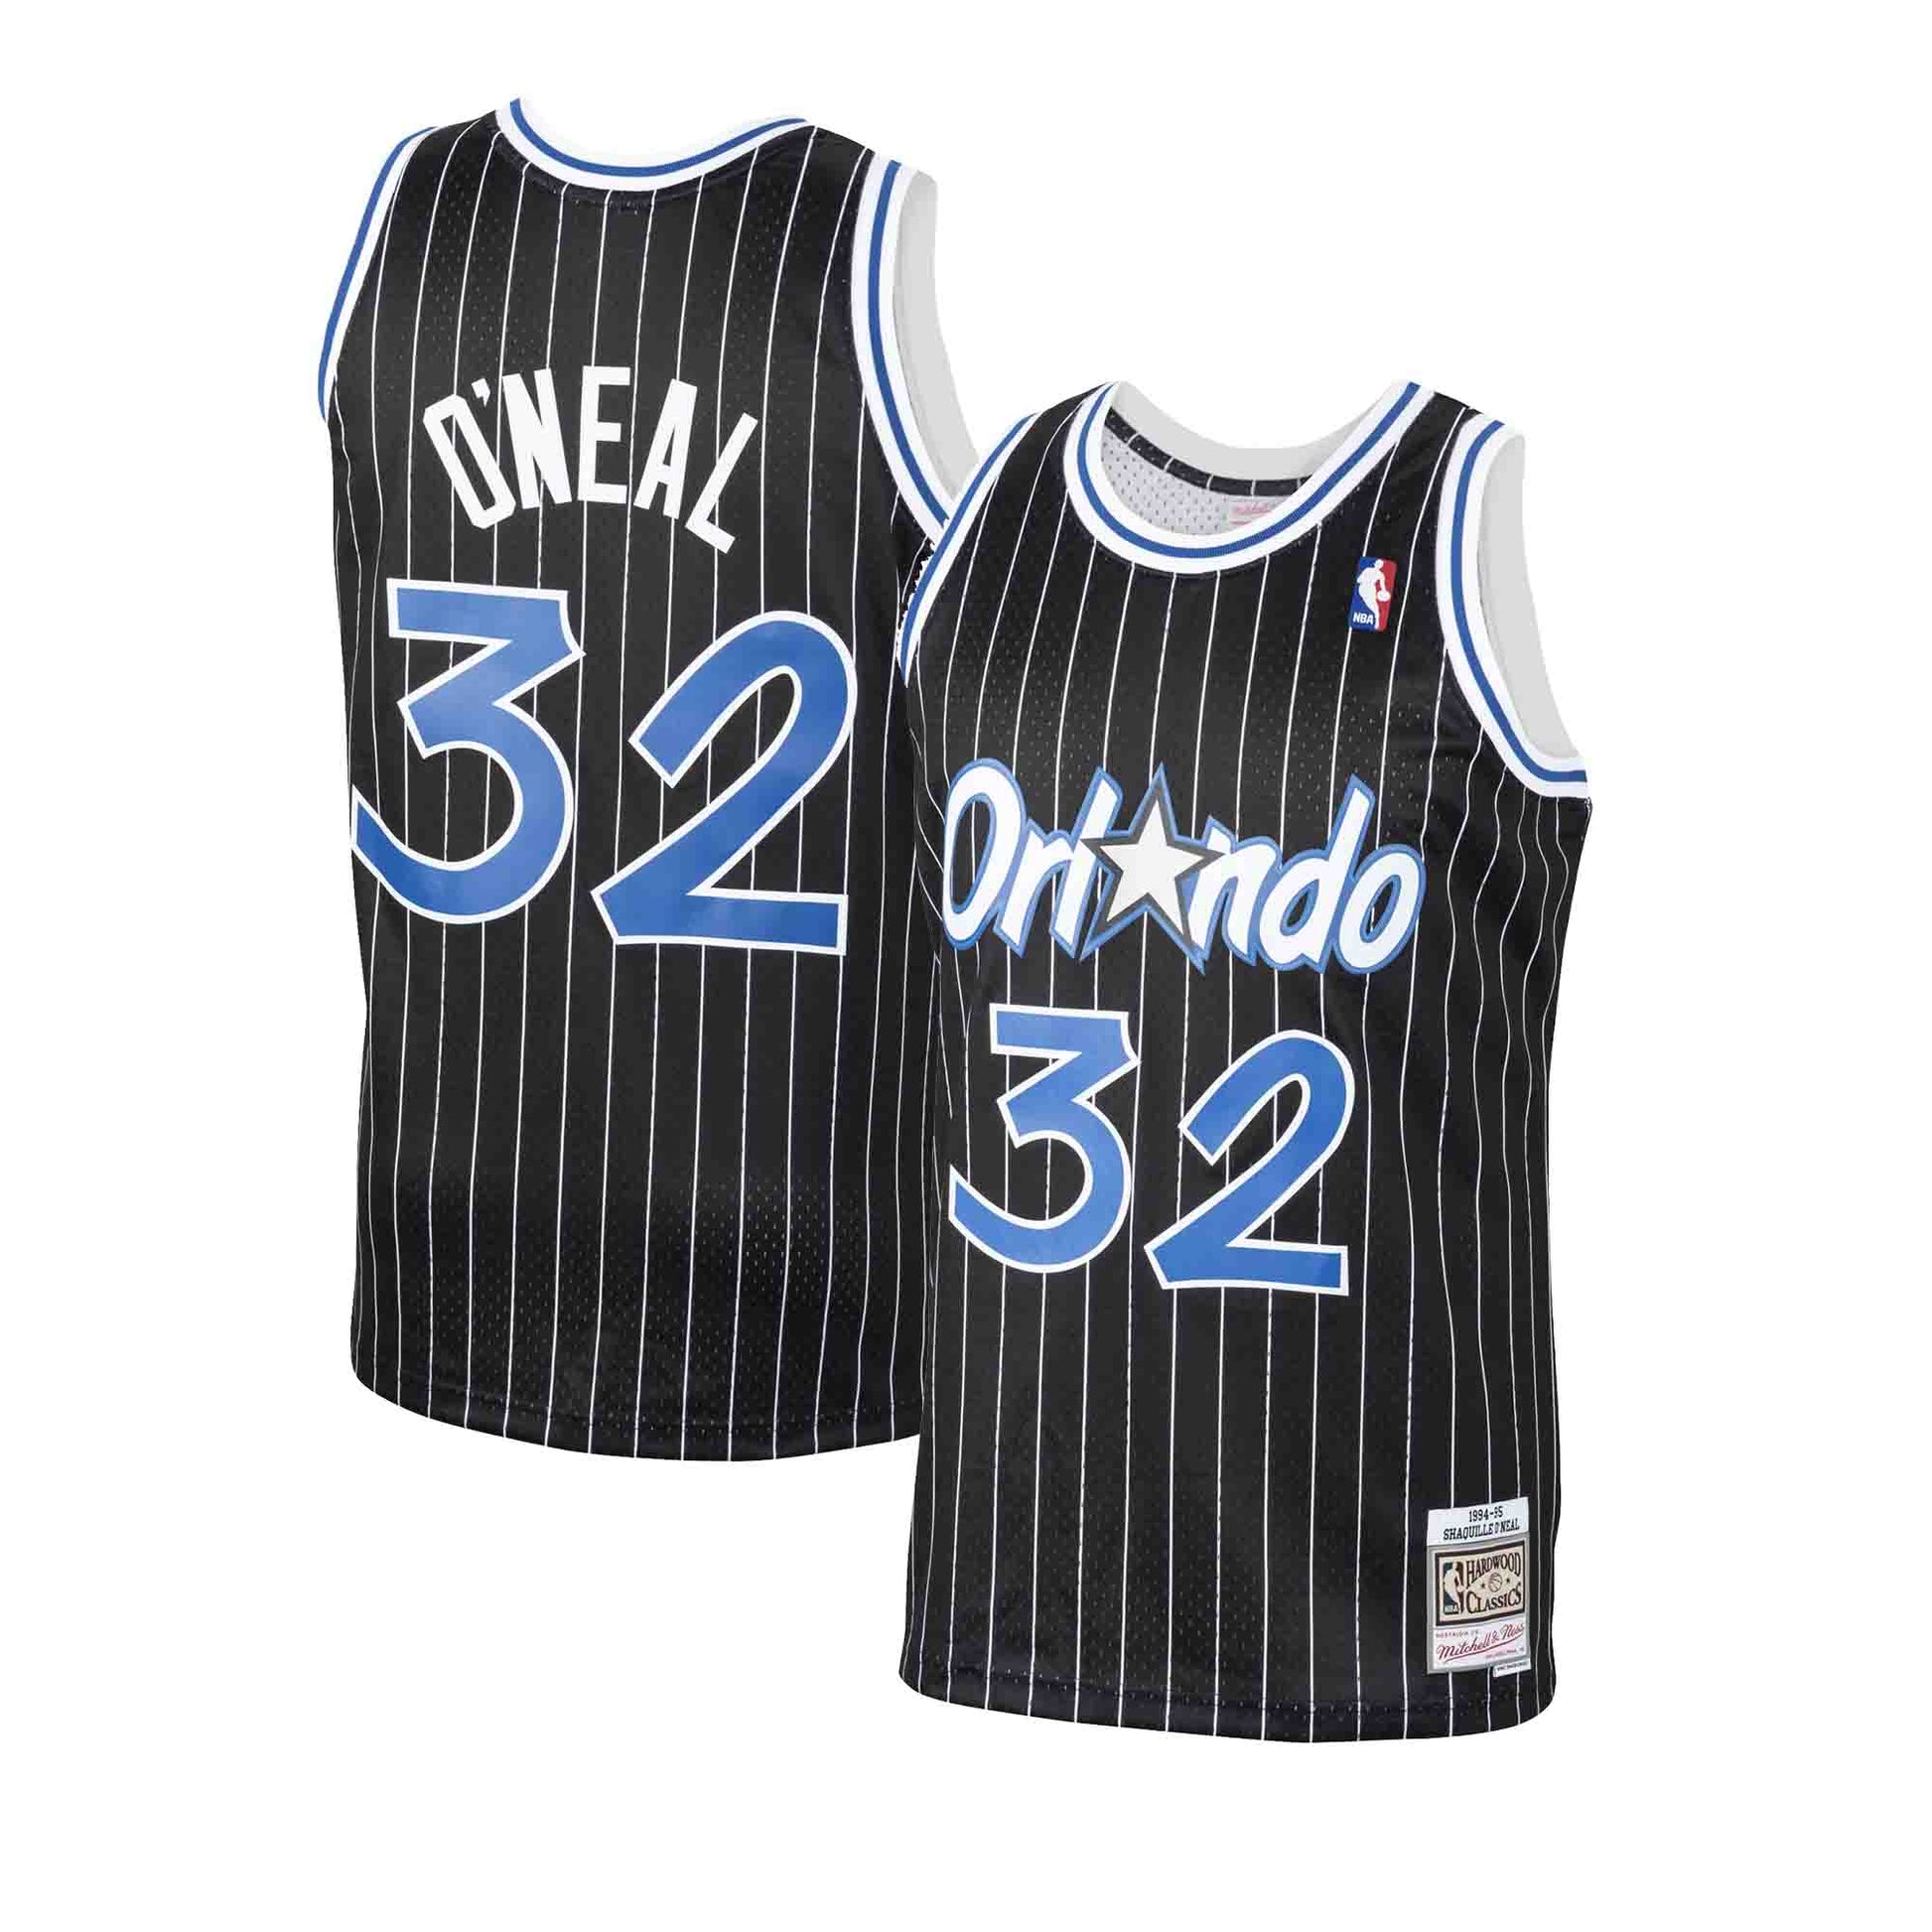 Shaquille O'Neal Orlando Magic Mitchell & Ness Authentic 1994 Blue NBA Jersey, 36